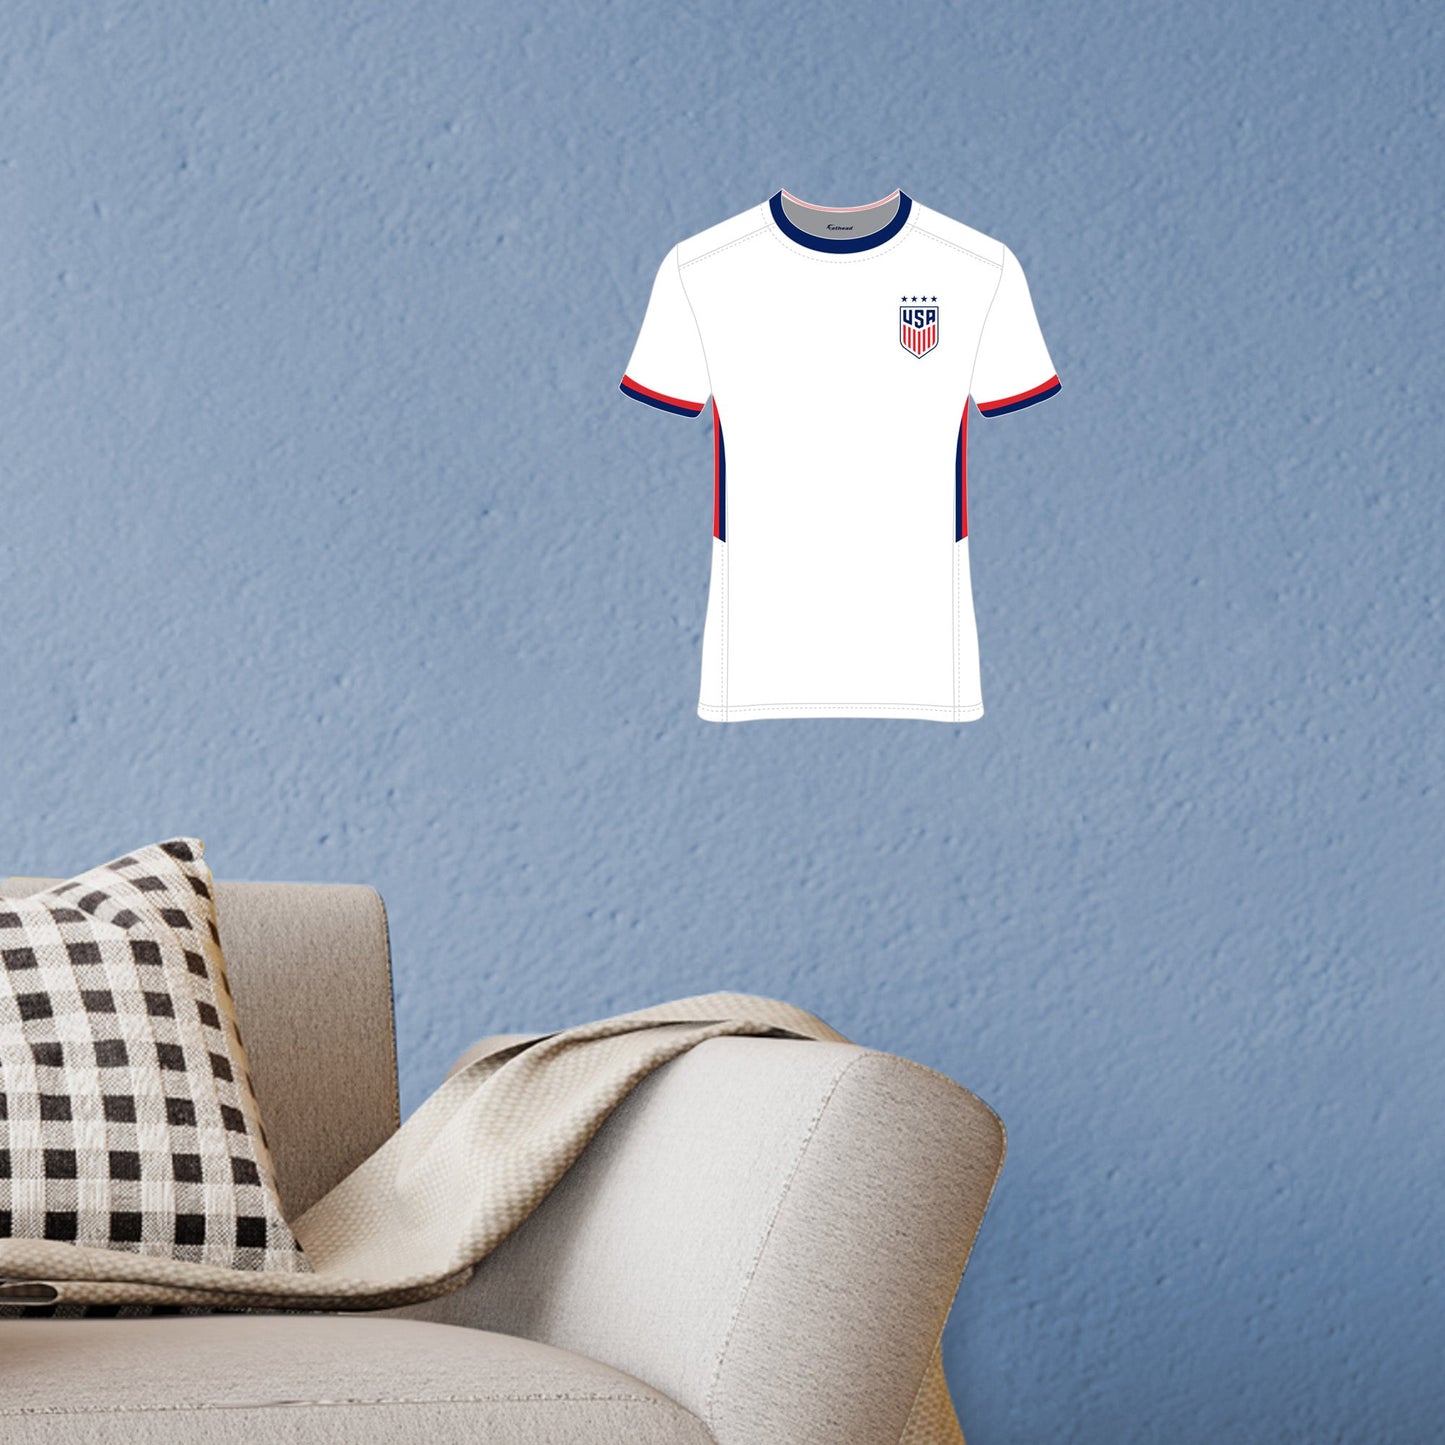 Jersey Dry Erase - Officially Licensed USWNT Removable Adhesive Decal